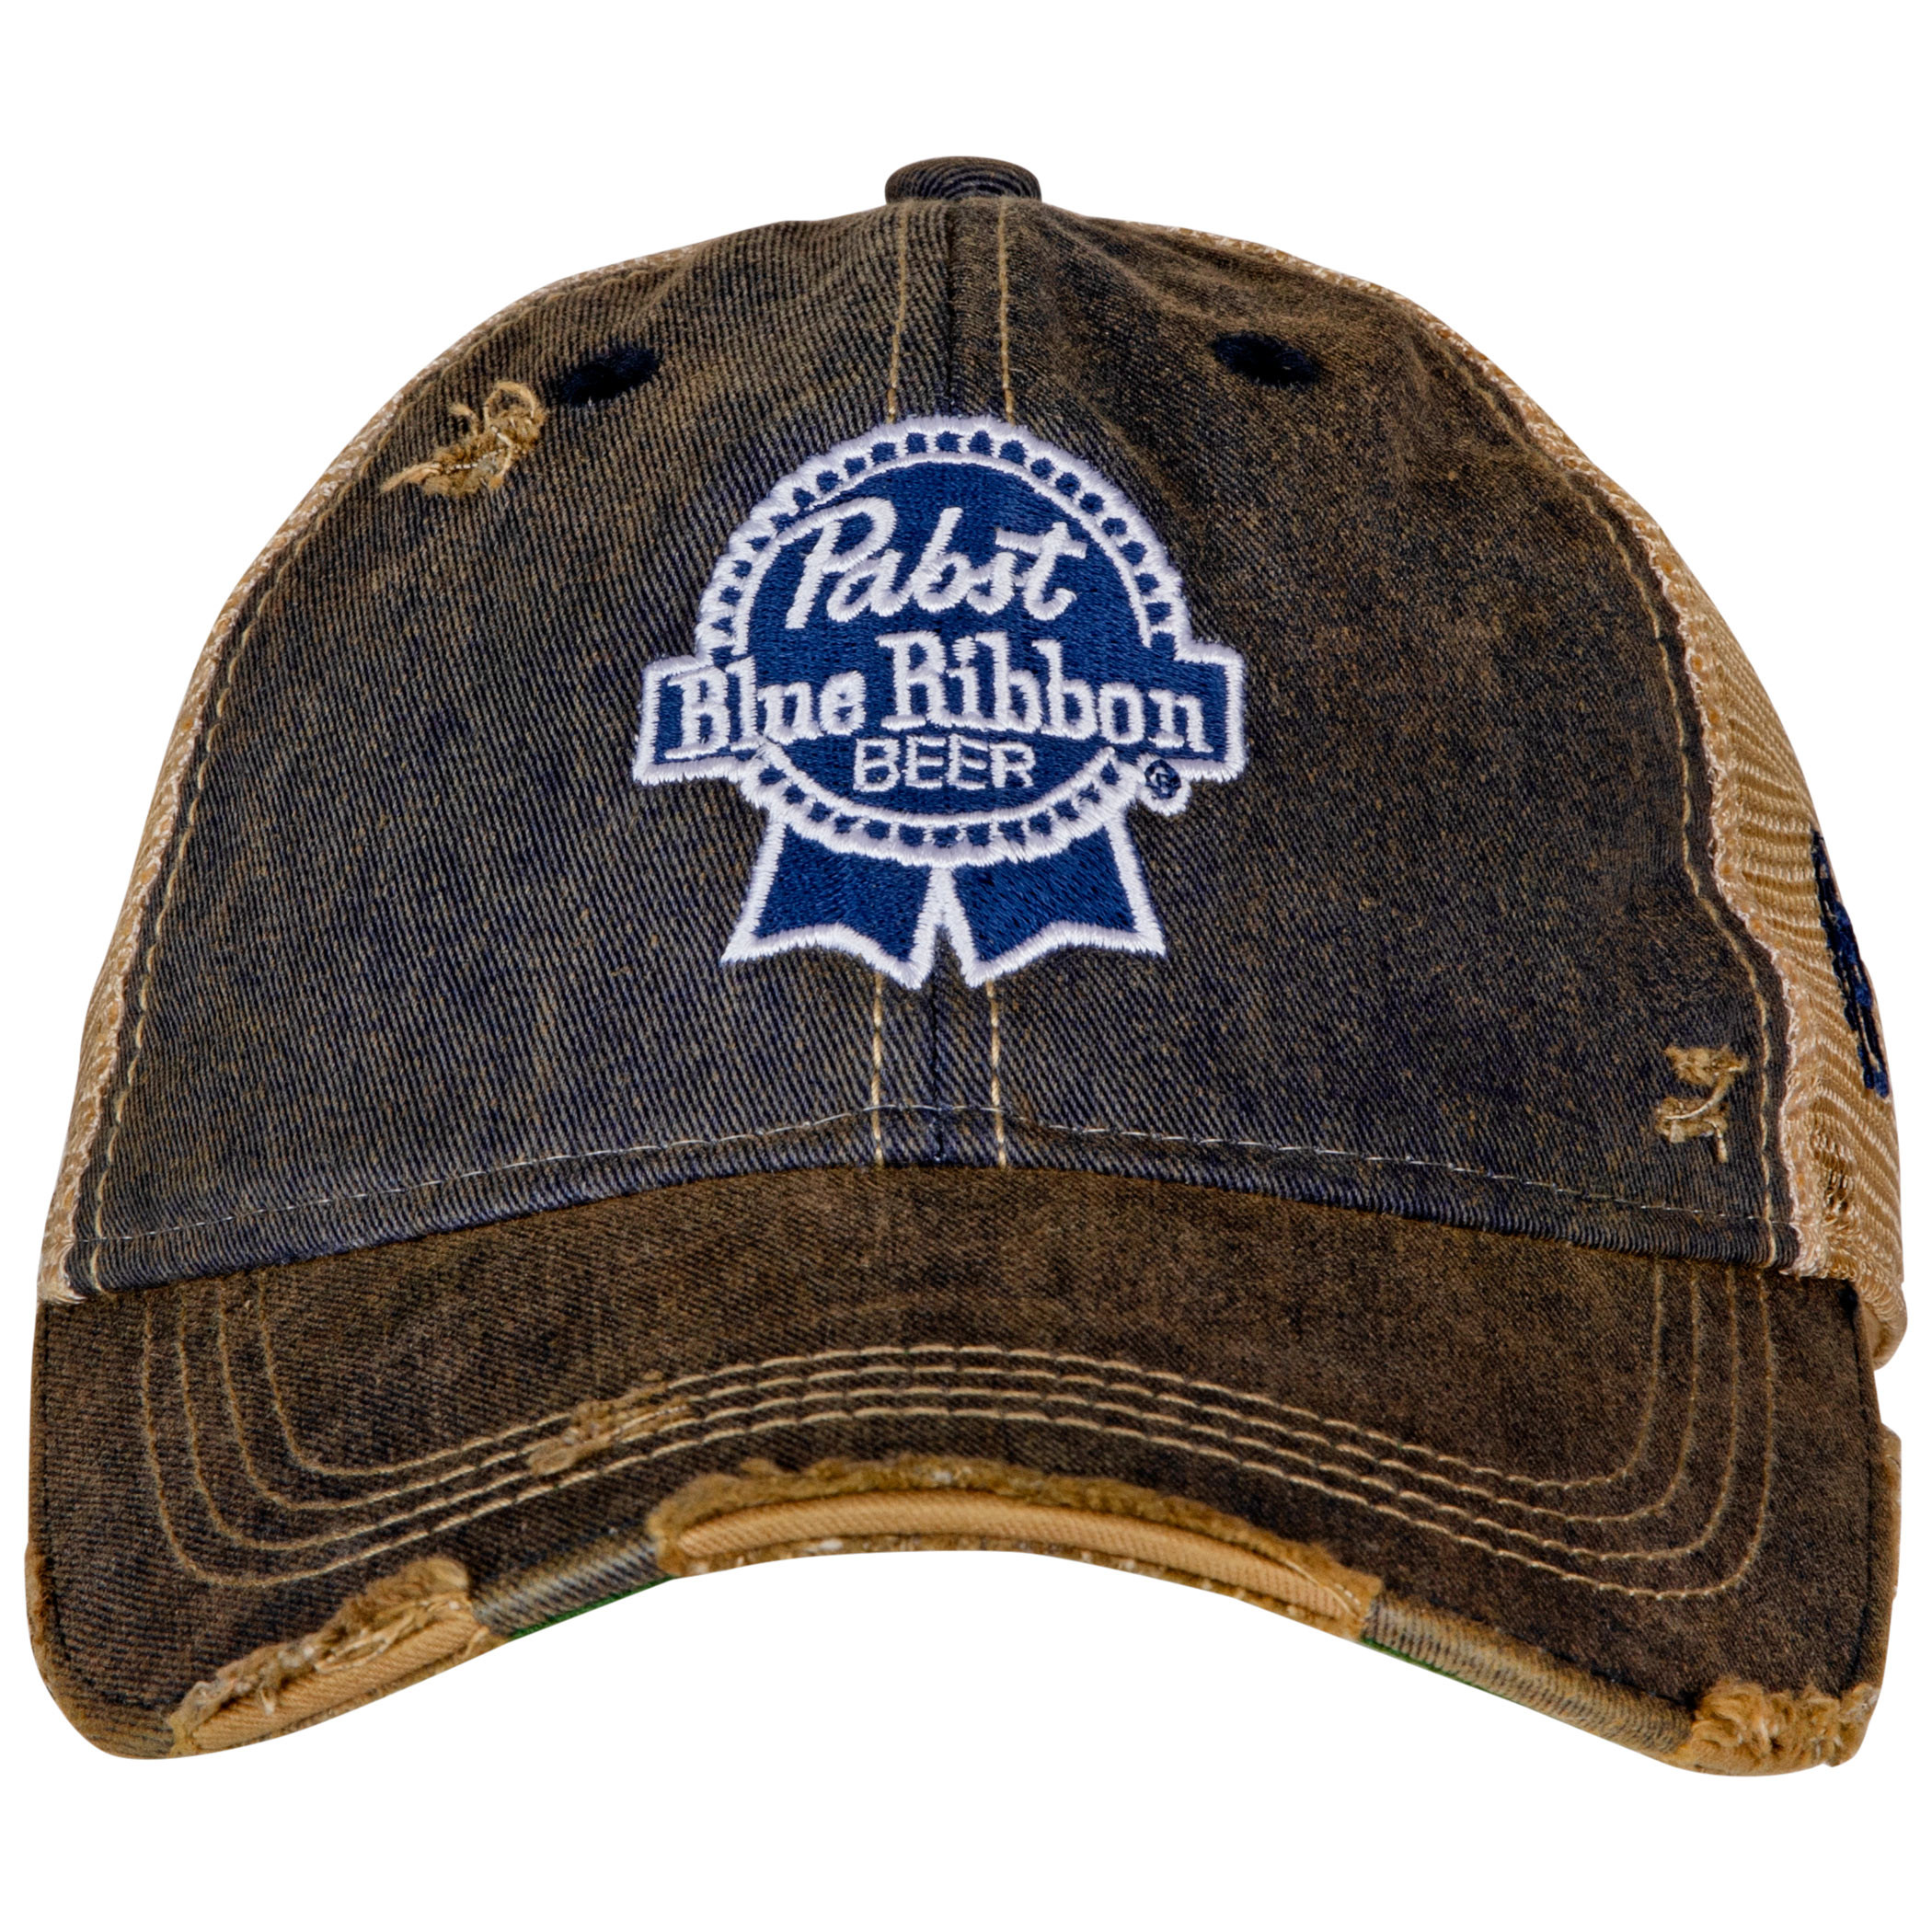 Pabst Blue Ribbon Logo Patch Distressed Tea-Stained Adjustable Hat